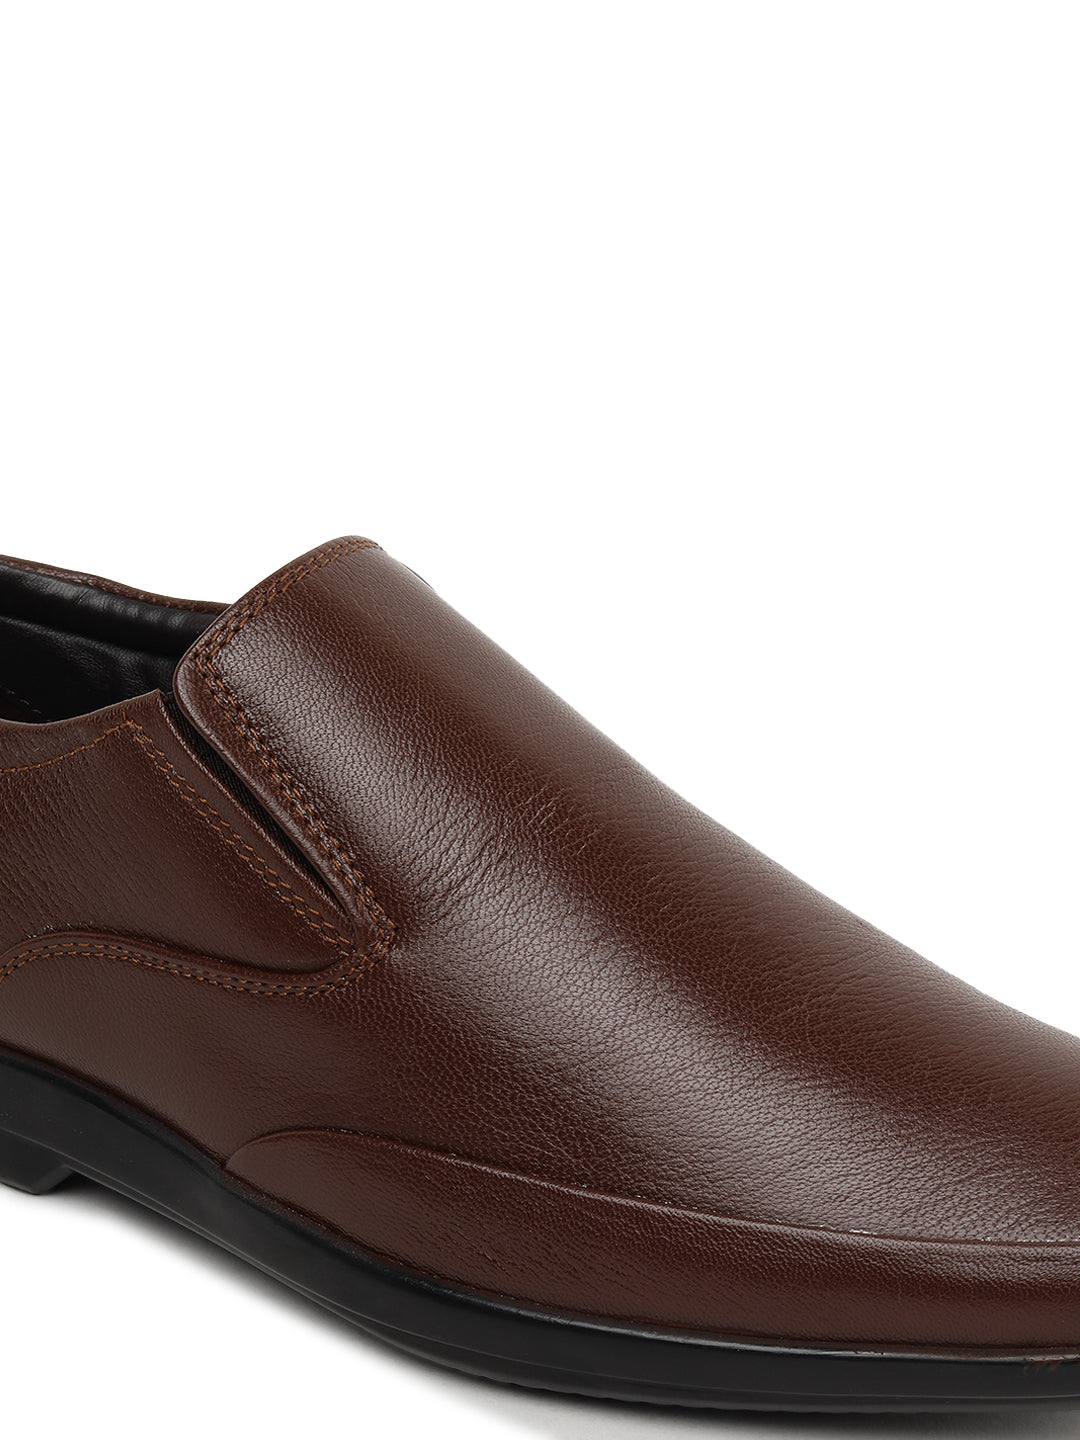 Paragon R11229G Men Formal Shoes | Corporate Office Shoes | Smart &amp; Sleek Design | Comfortable Sole with Cushioning | Daily &amp; Occasion Wear